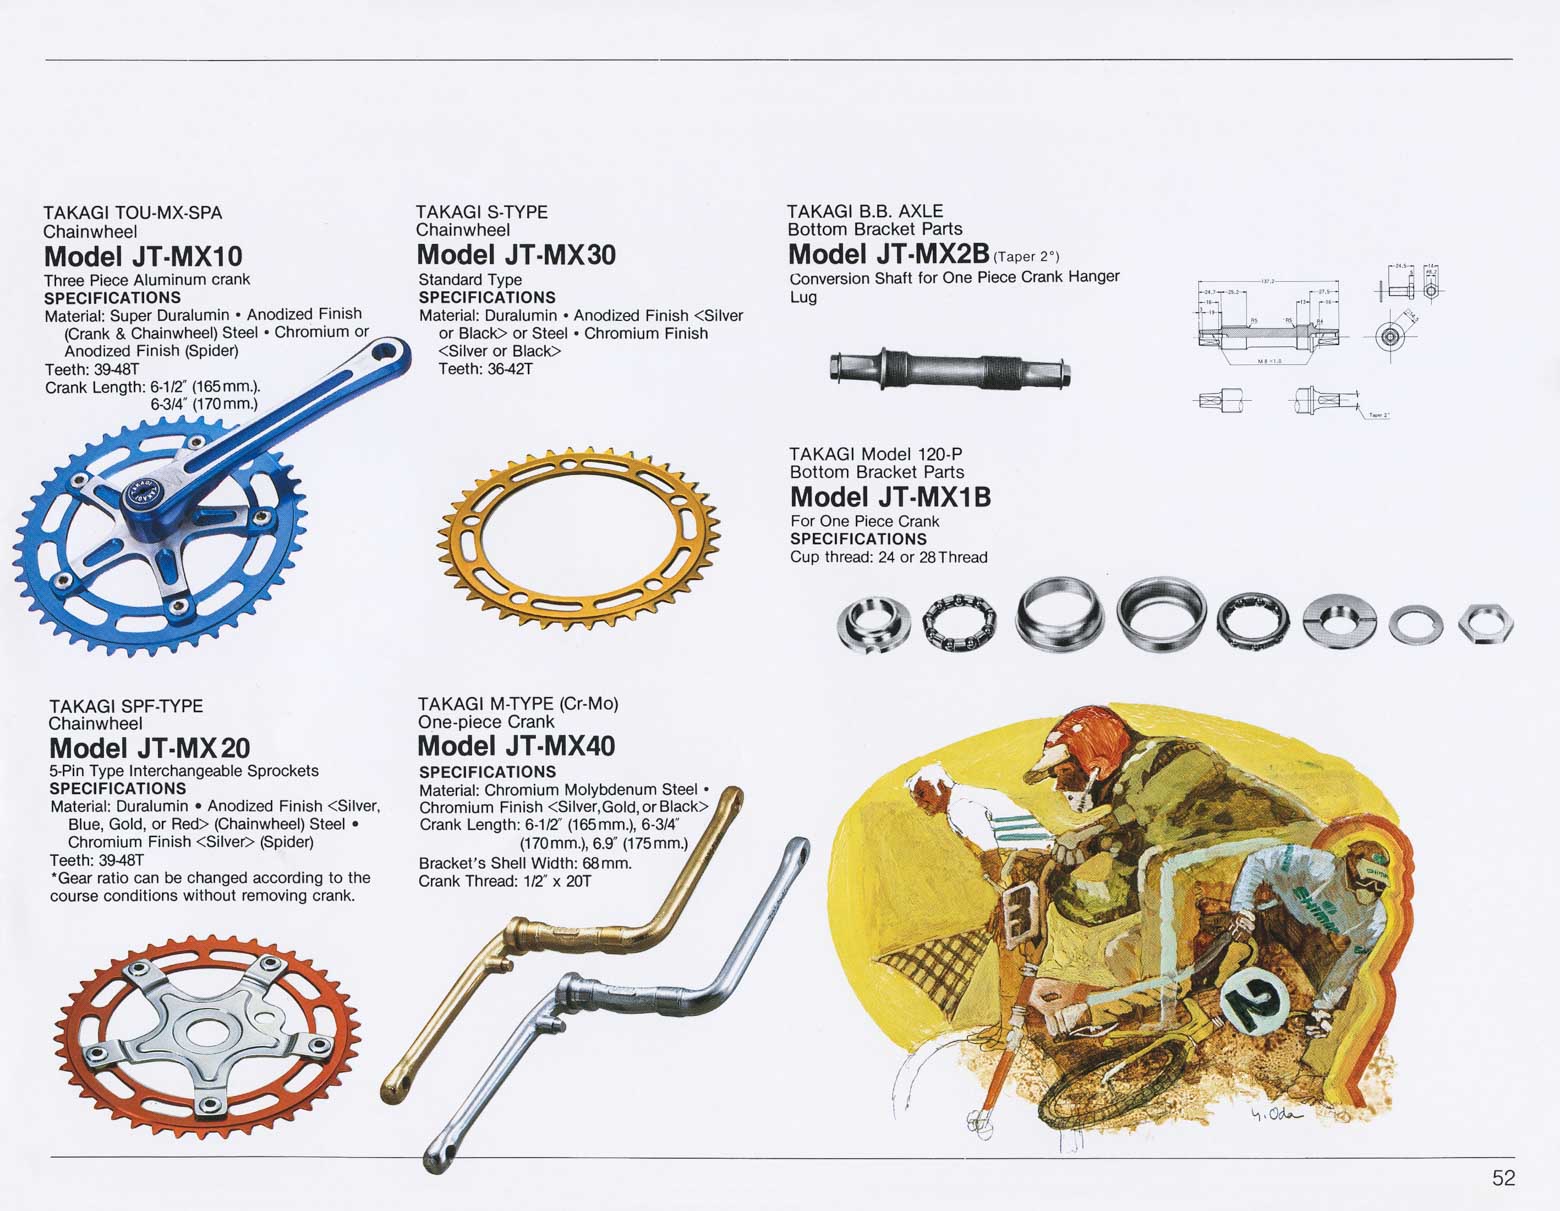 Shimano Bicycle System Components 1981 page 52 main image